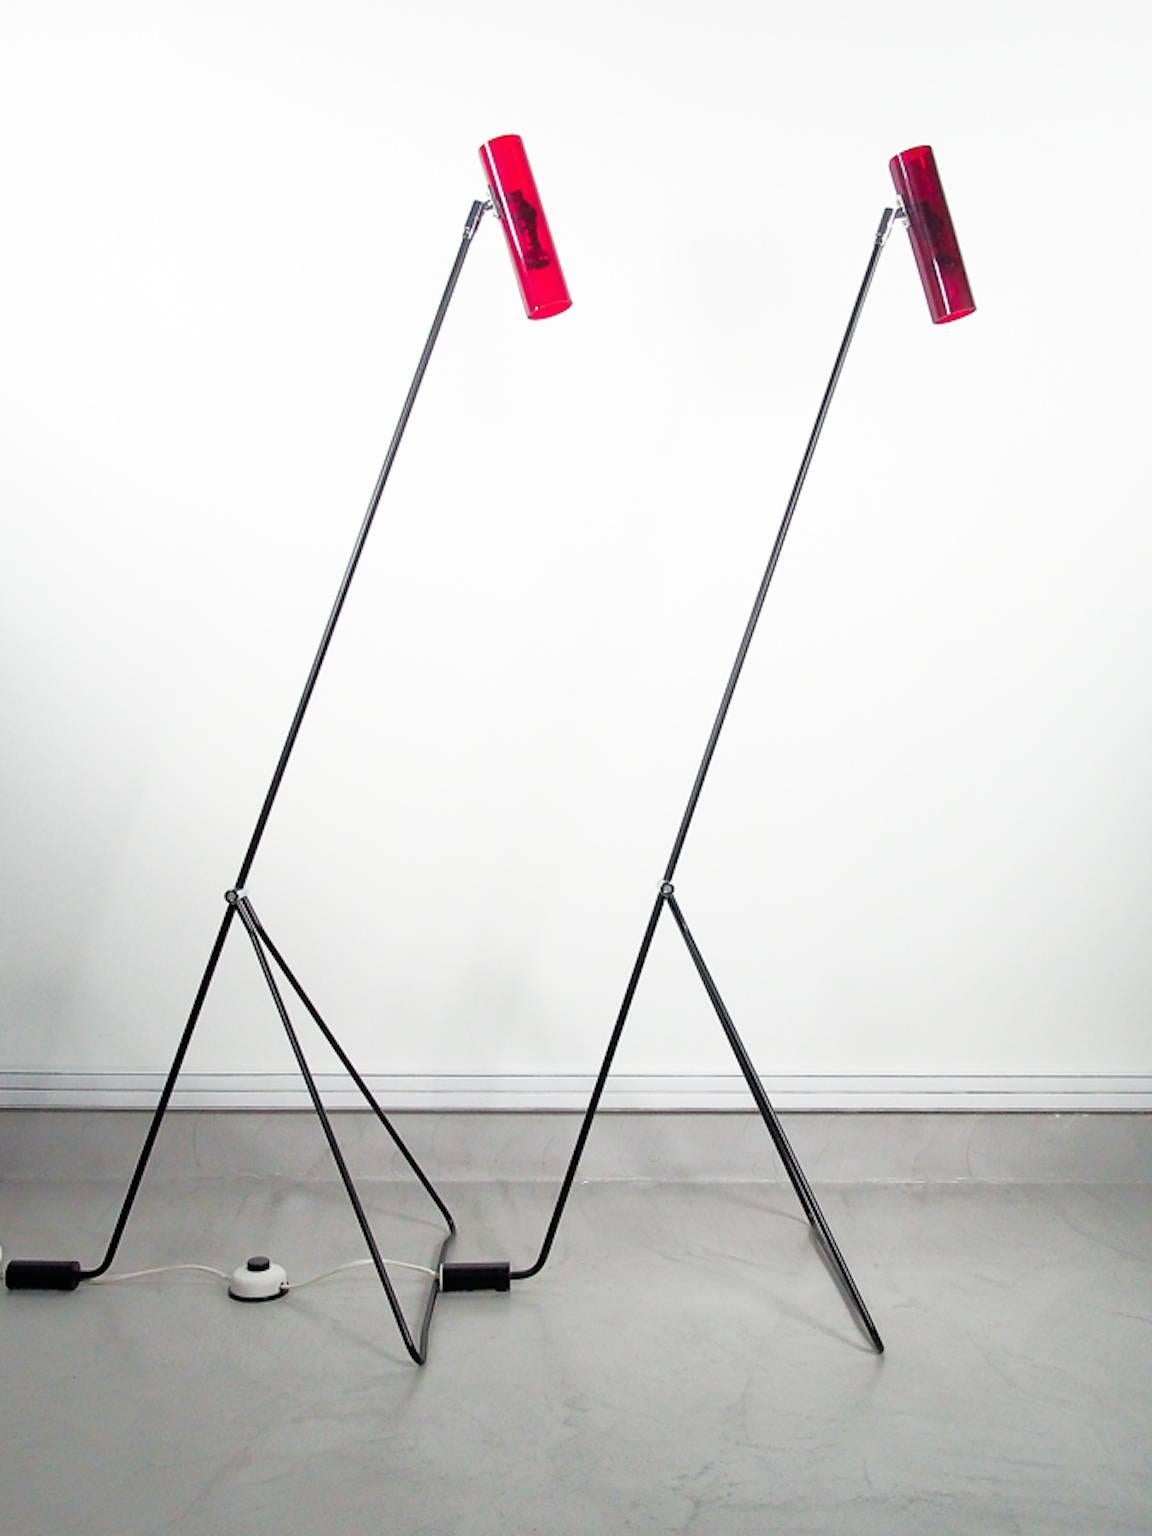 Two minimal style floor lamps with tubular steel frame and cylindrical lampshade in red Perspex. Design attributed to Alf Svensson, manufactured by Bergbom Scanlight AB in Sweden.